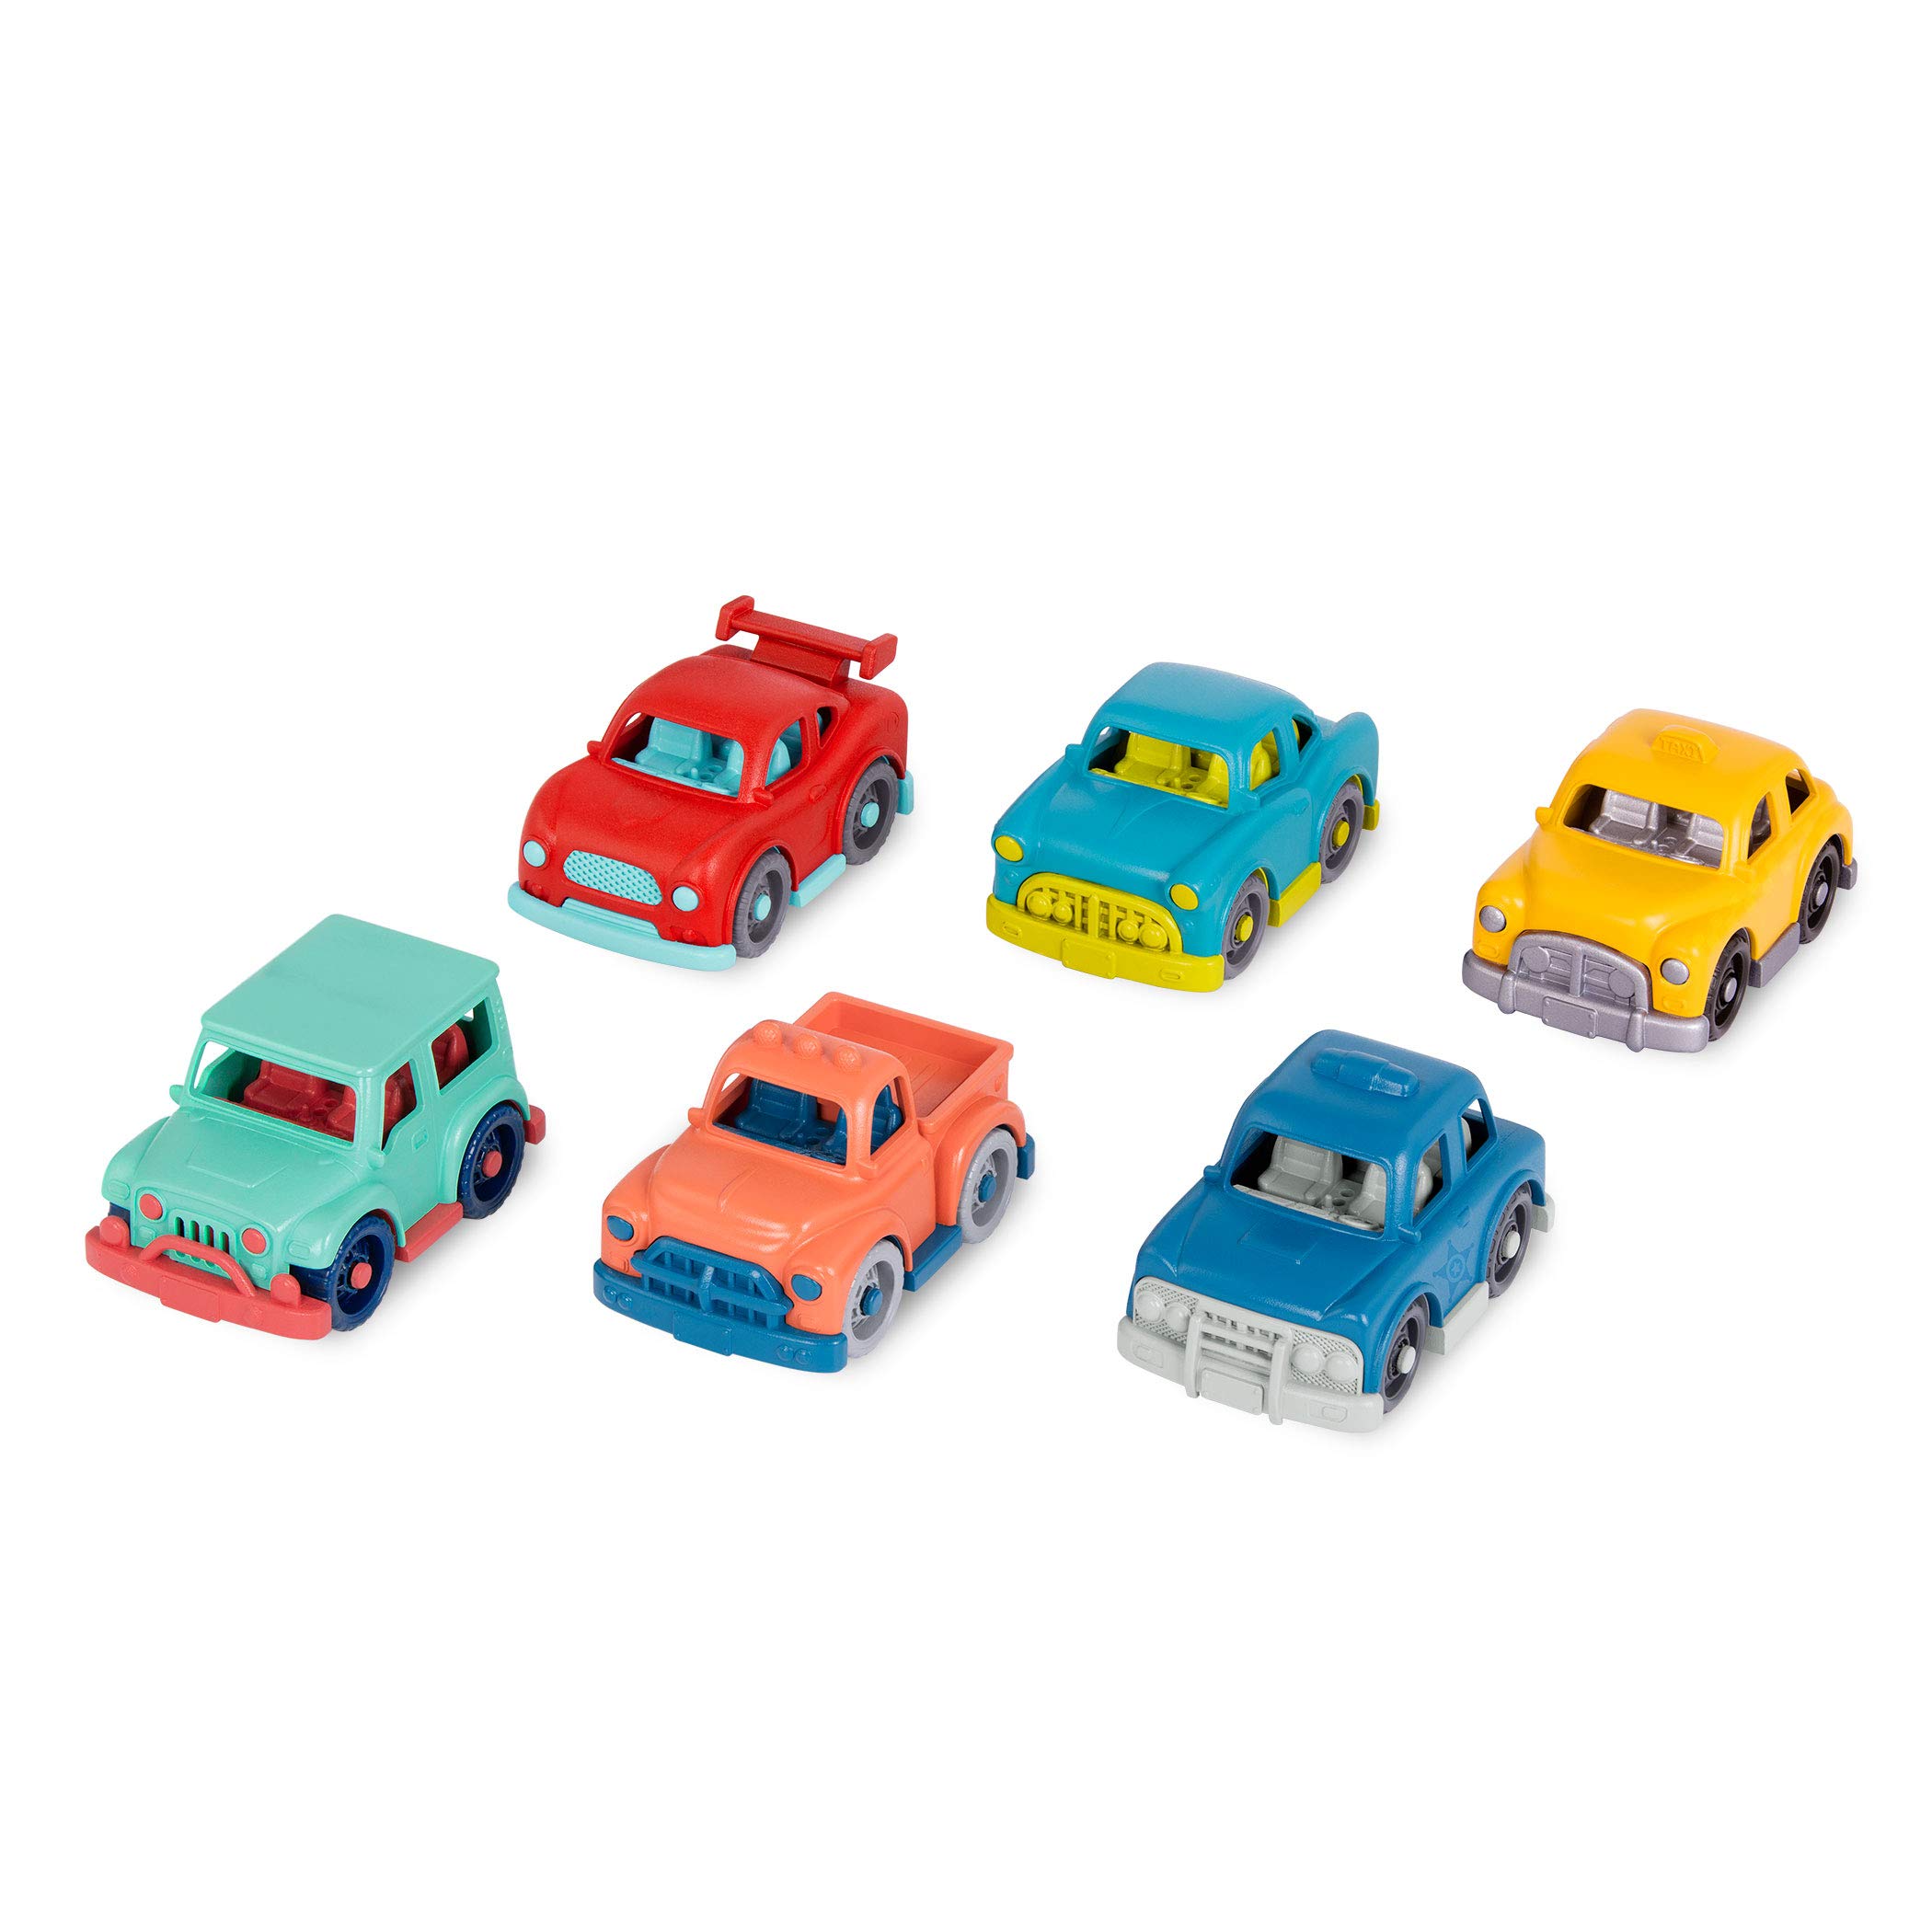 Wonder Wheels by Battat – Toy Cars – Set of 6 Mini Vehicles – Racer, Pick-Up Truck, Police Car, Taxi, Retro Car, 4x4 – Cars for Toddlers, Kids – 1 Year +, Multicolor (VE1037Z)